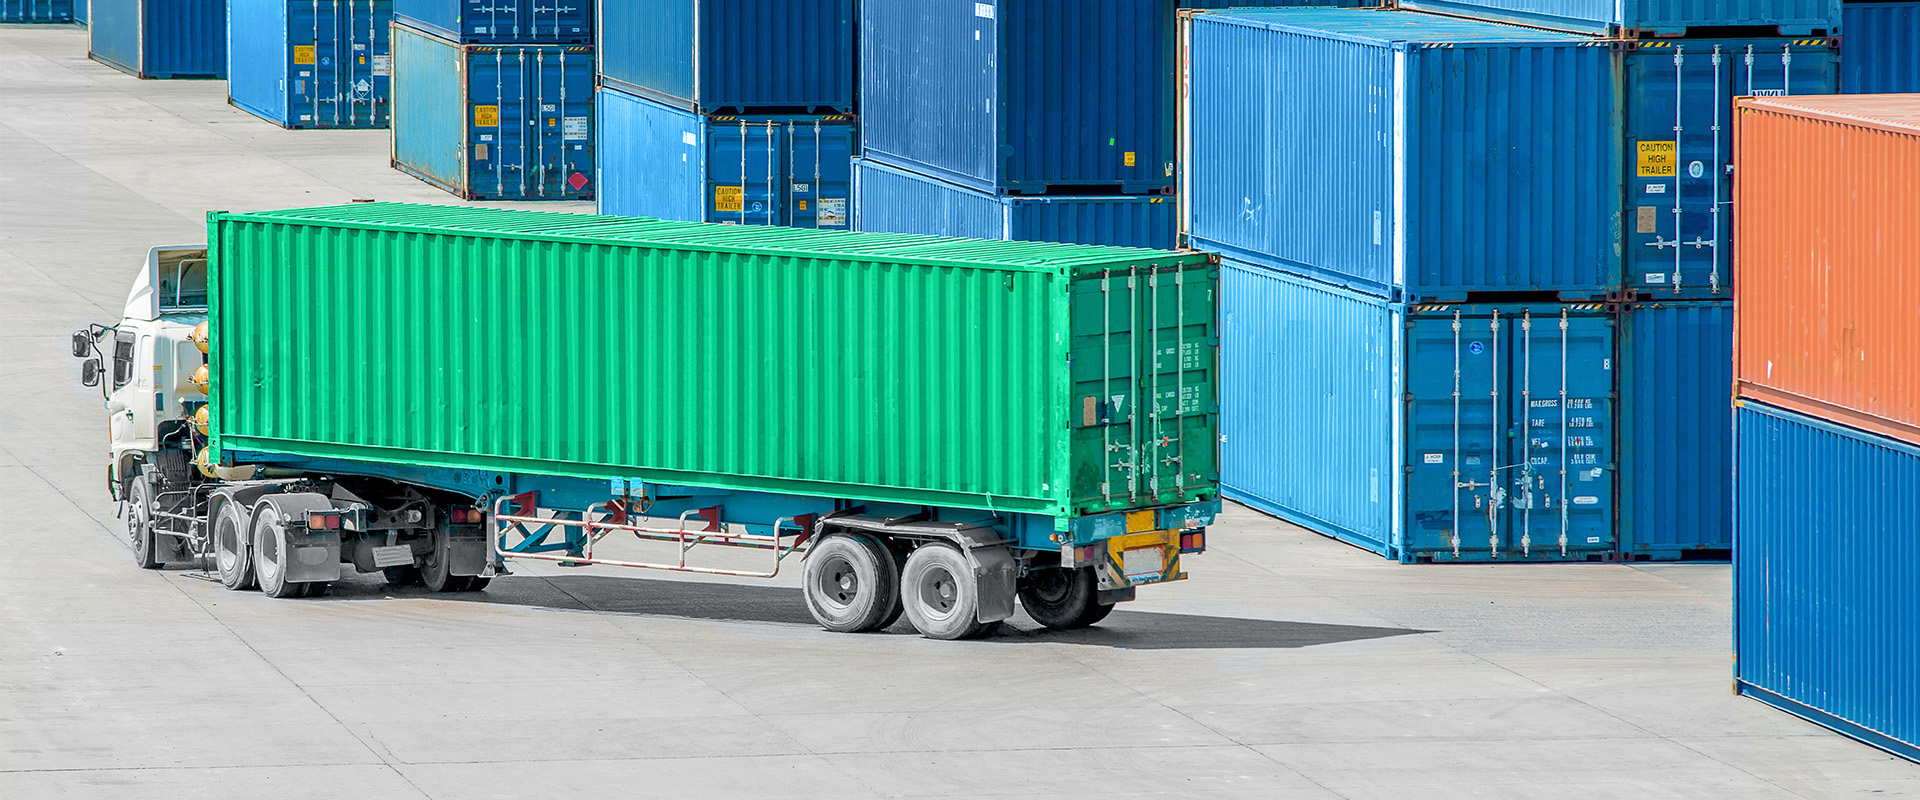 Drayage services are a crucial part of intermodal shipping. We answer some of the most common questions about drayage and how it impacts shipping operations.